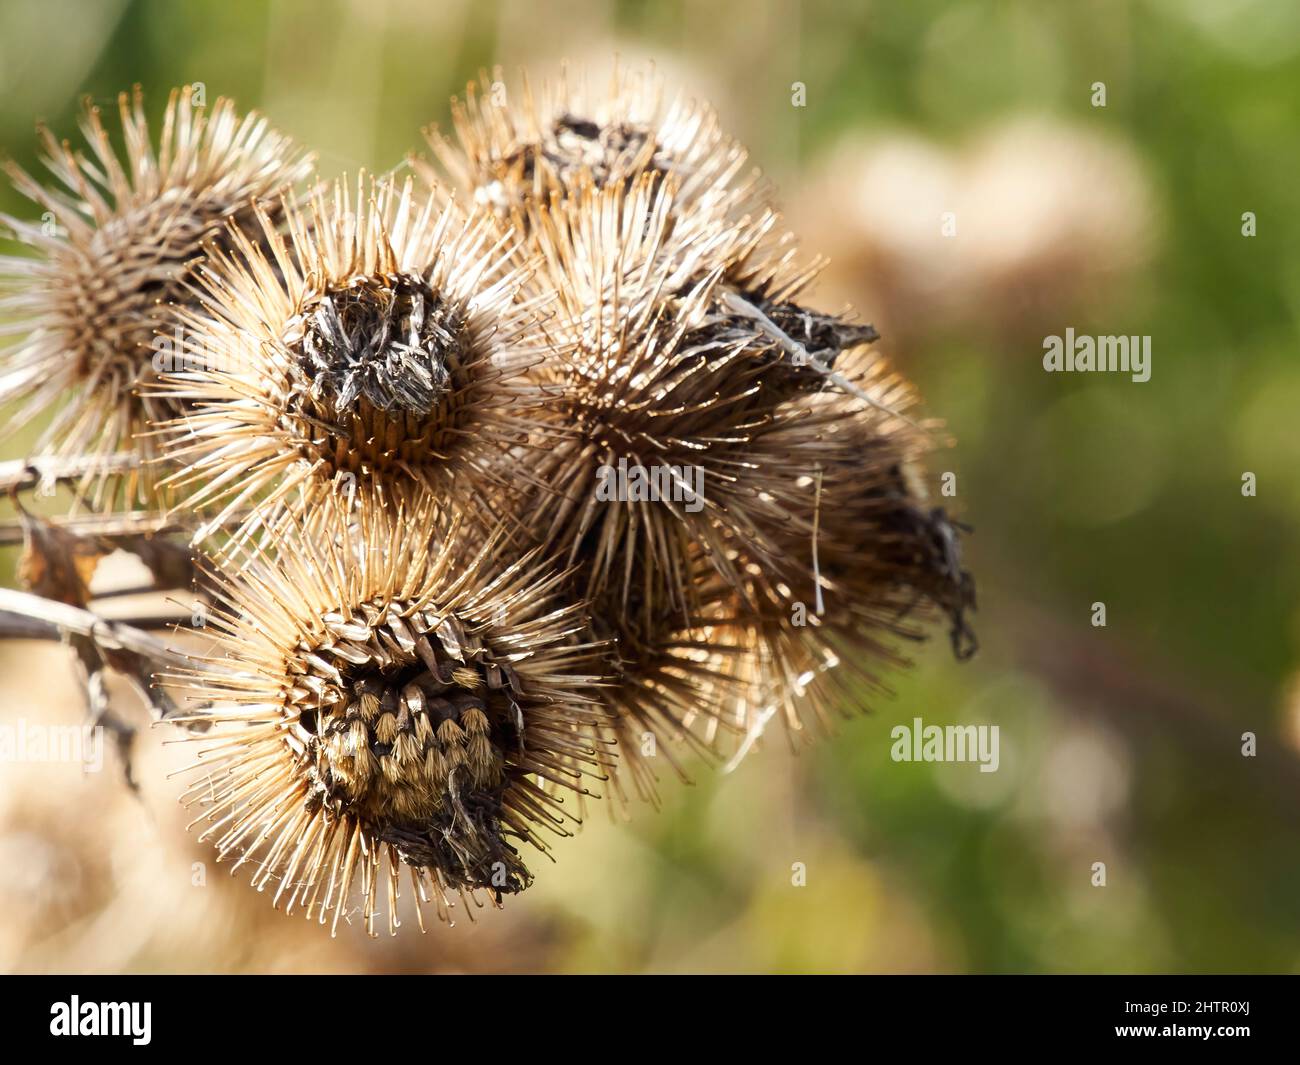 A close up view of a clump of spiky, textured burrs, lit up by bright, sharp autumn sunlight, against a de-focused background of greenery. Stock Photo